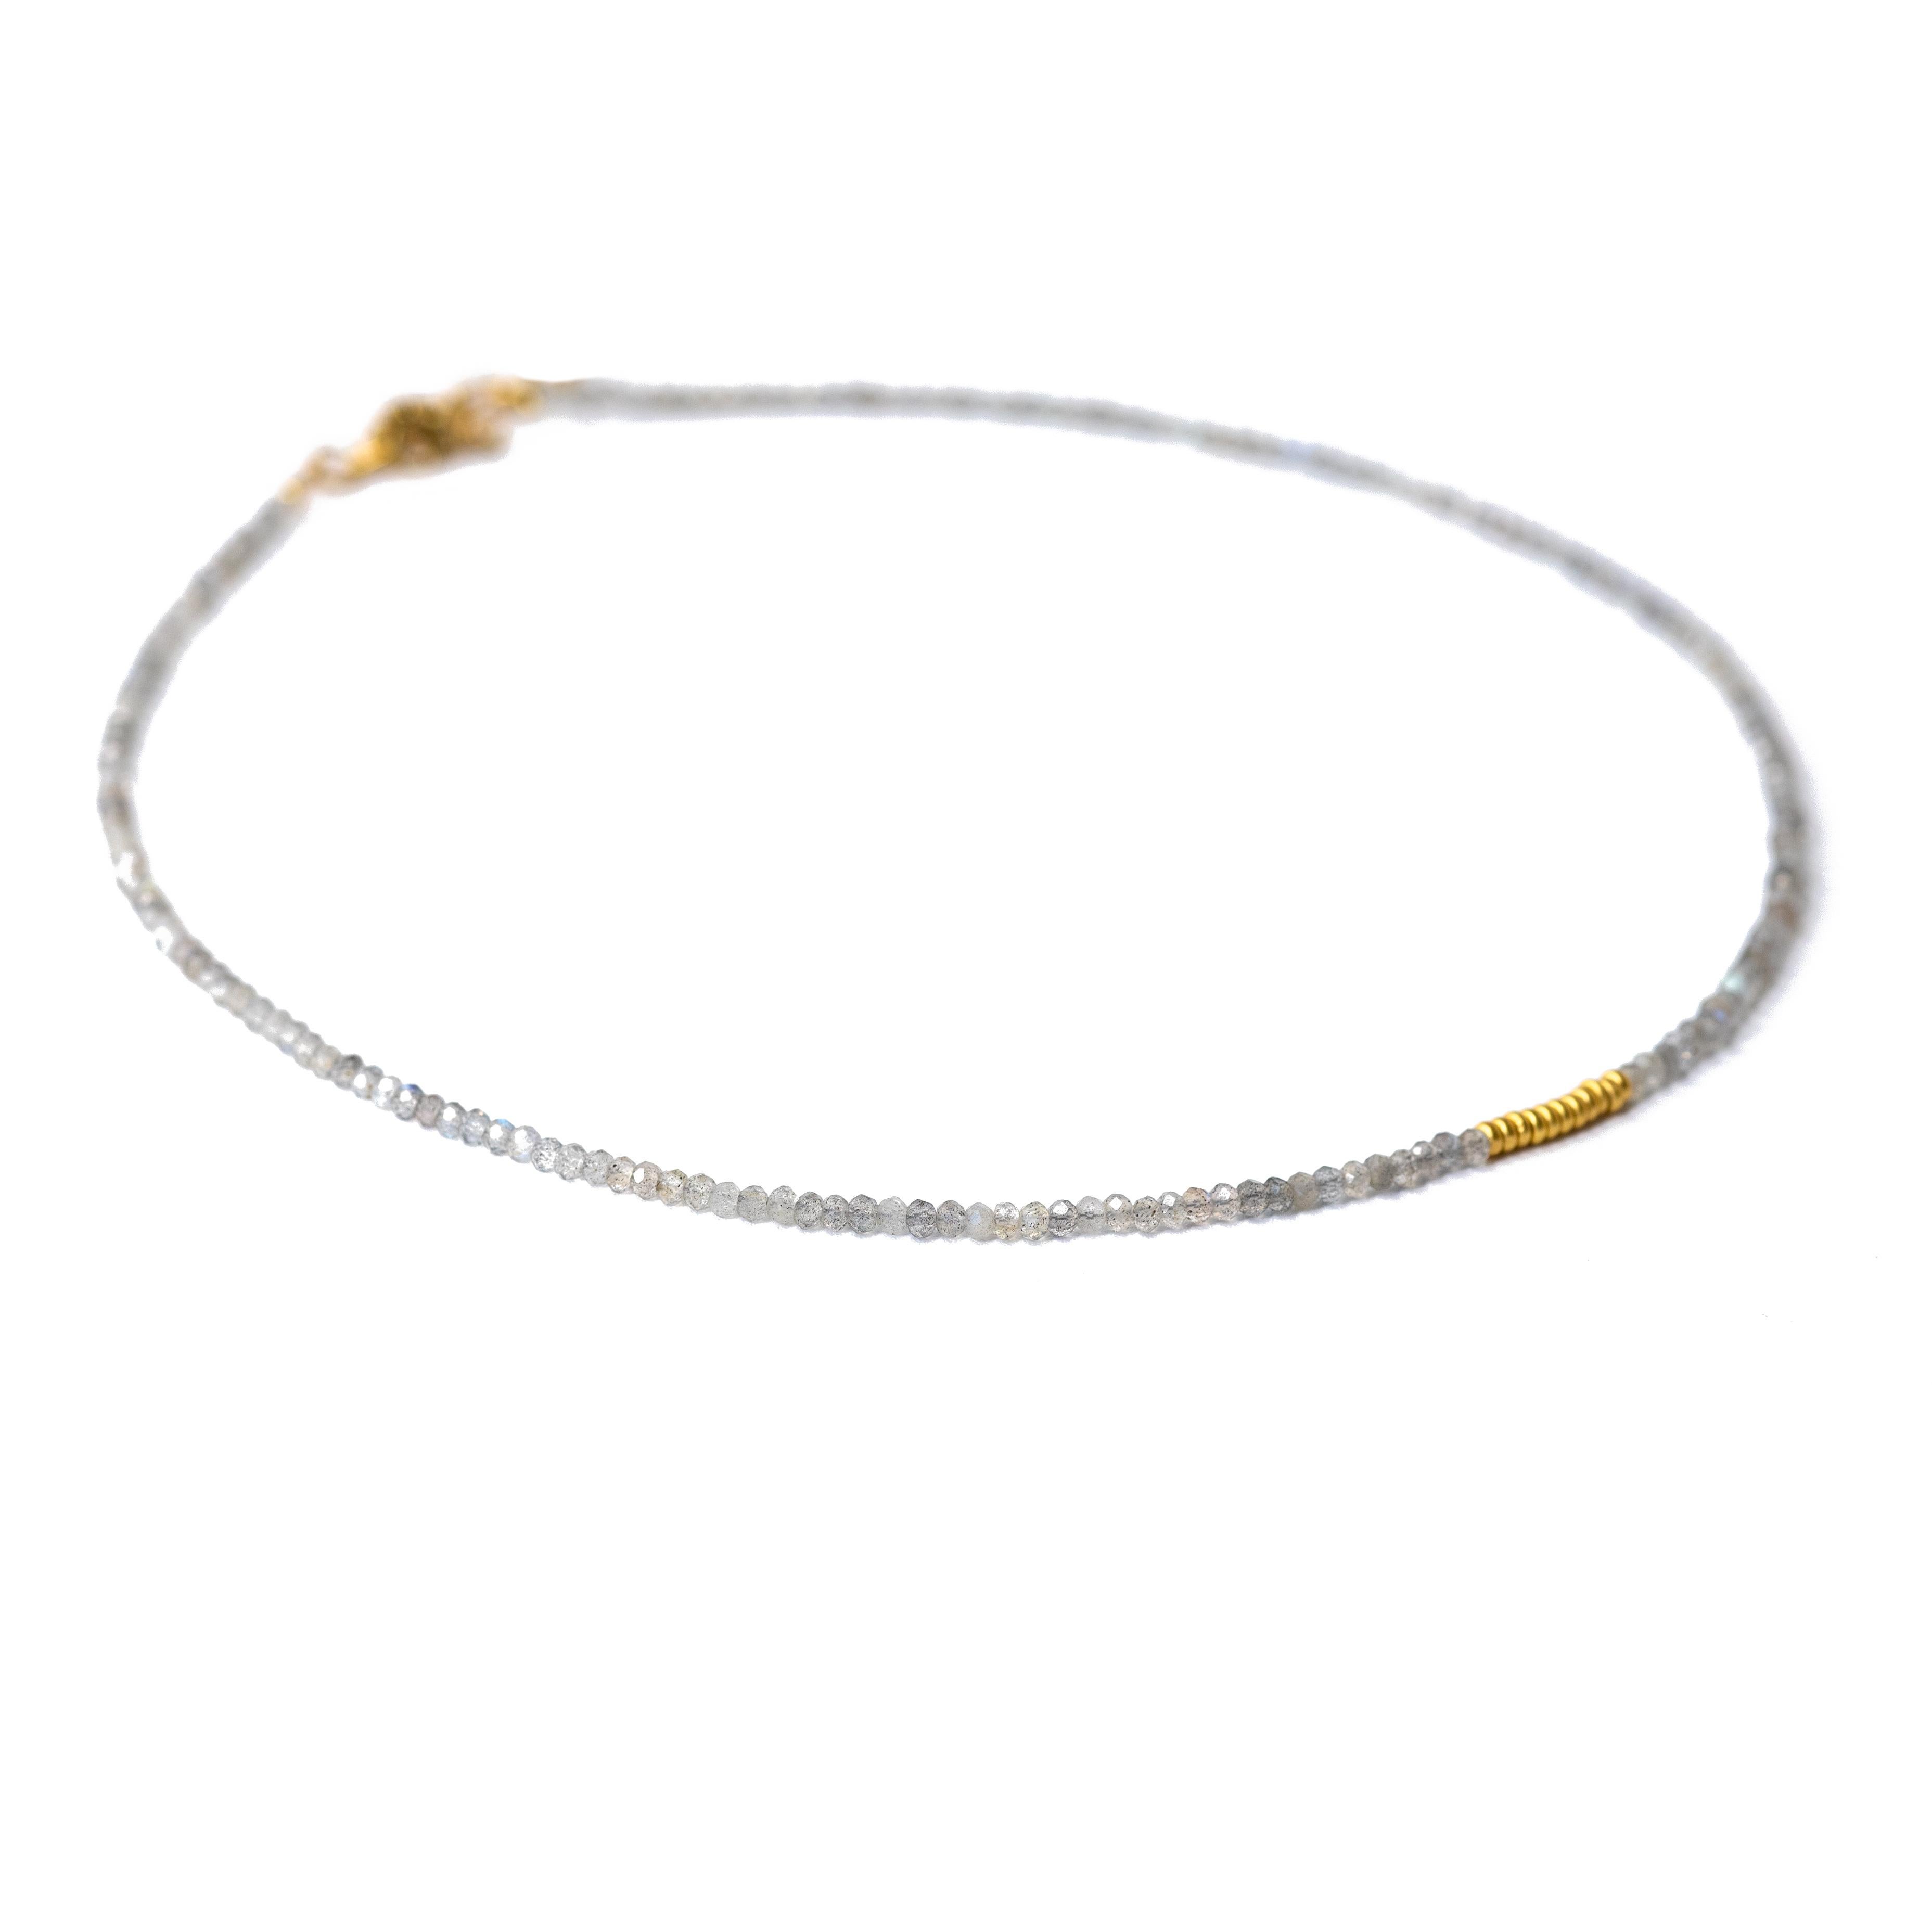 This delicate Tiny Labradorite Gold Beaded Necklace is a perfect addition to any jewelry collection. The Shiny Grey Choker is made with high-quality gold beads and features a stunning labradorite stone that adds a touch of elegance to any